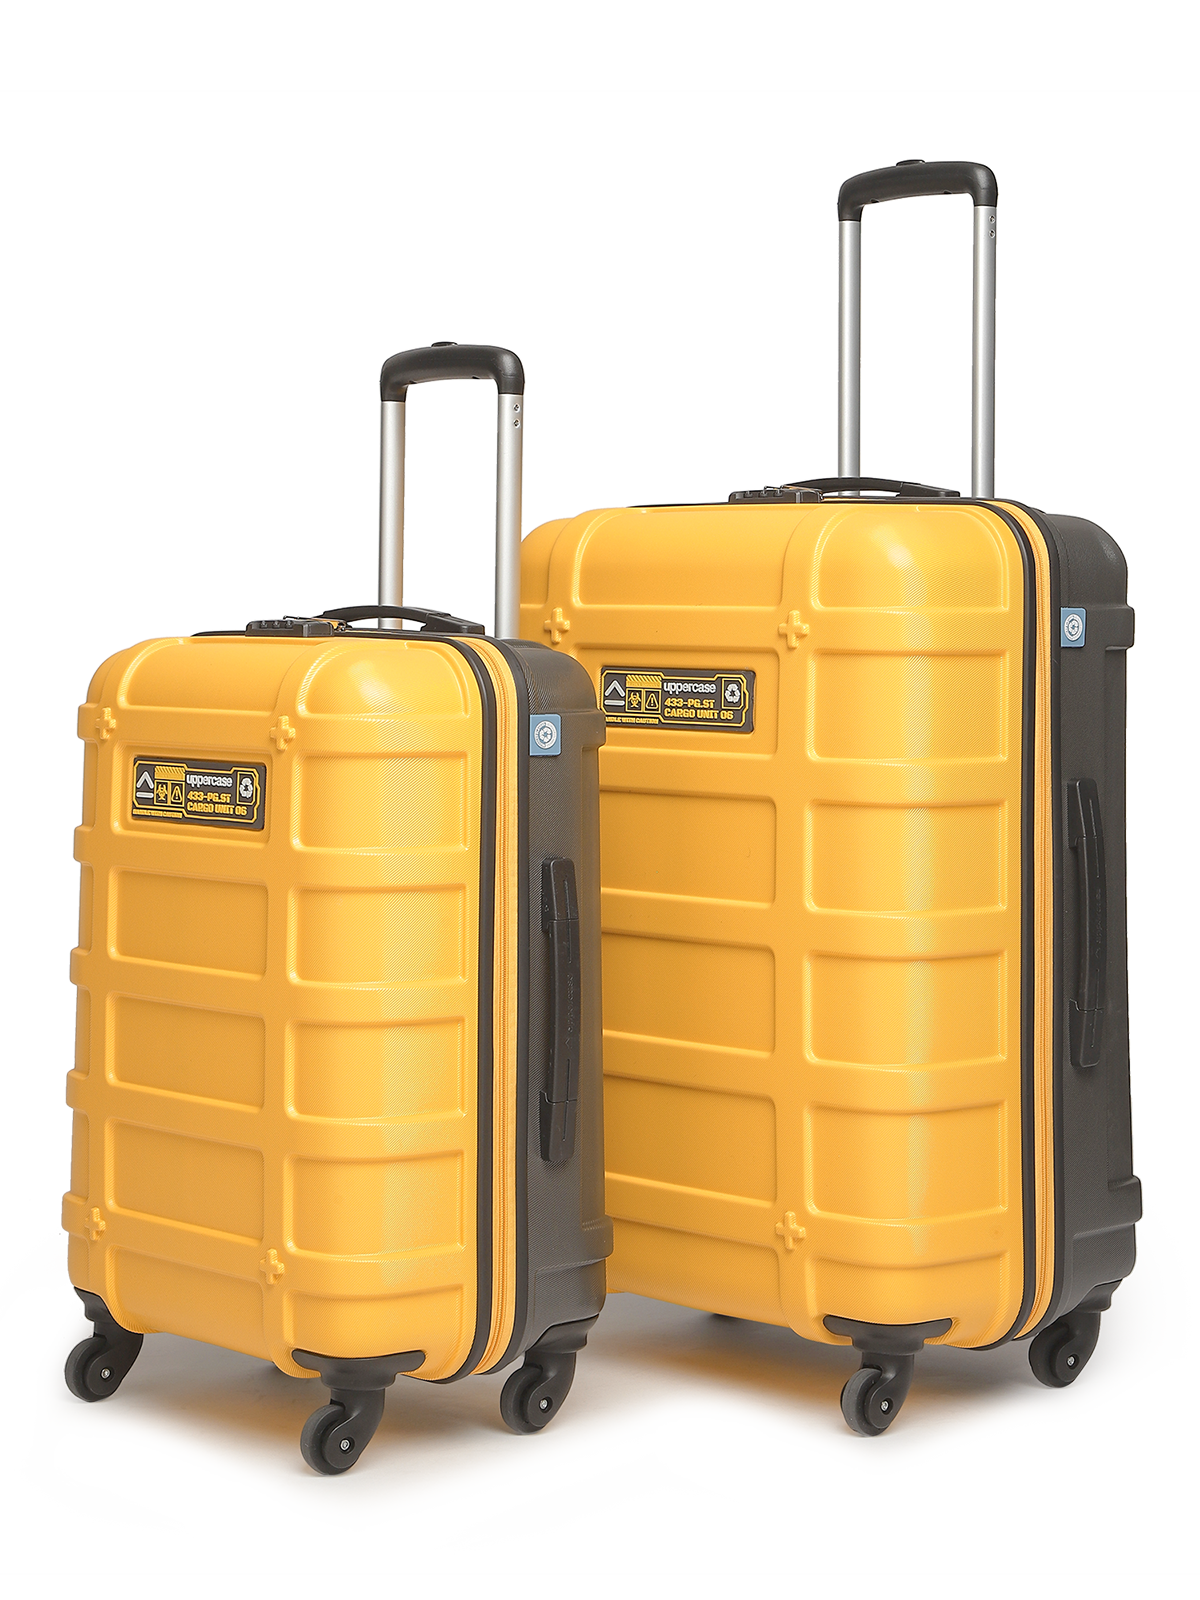 uppercase Cargo Trolley Bag Set of 2 (M+L) Cabin & Check-in Hardsided LuggageSecure Combination Lock Scratch-proof Surface Mesh ConviPack Suitcase for Men & Women 2000 Days Warranty(Yellow)